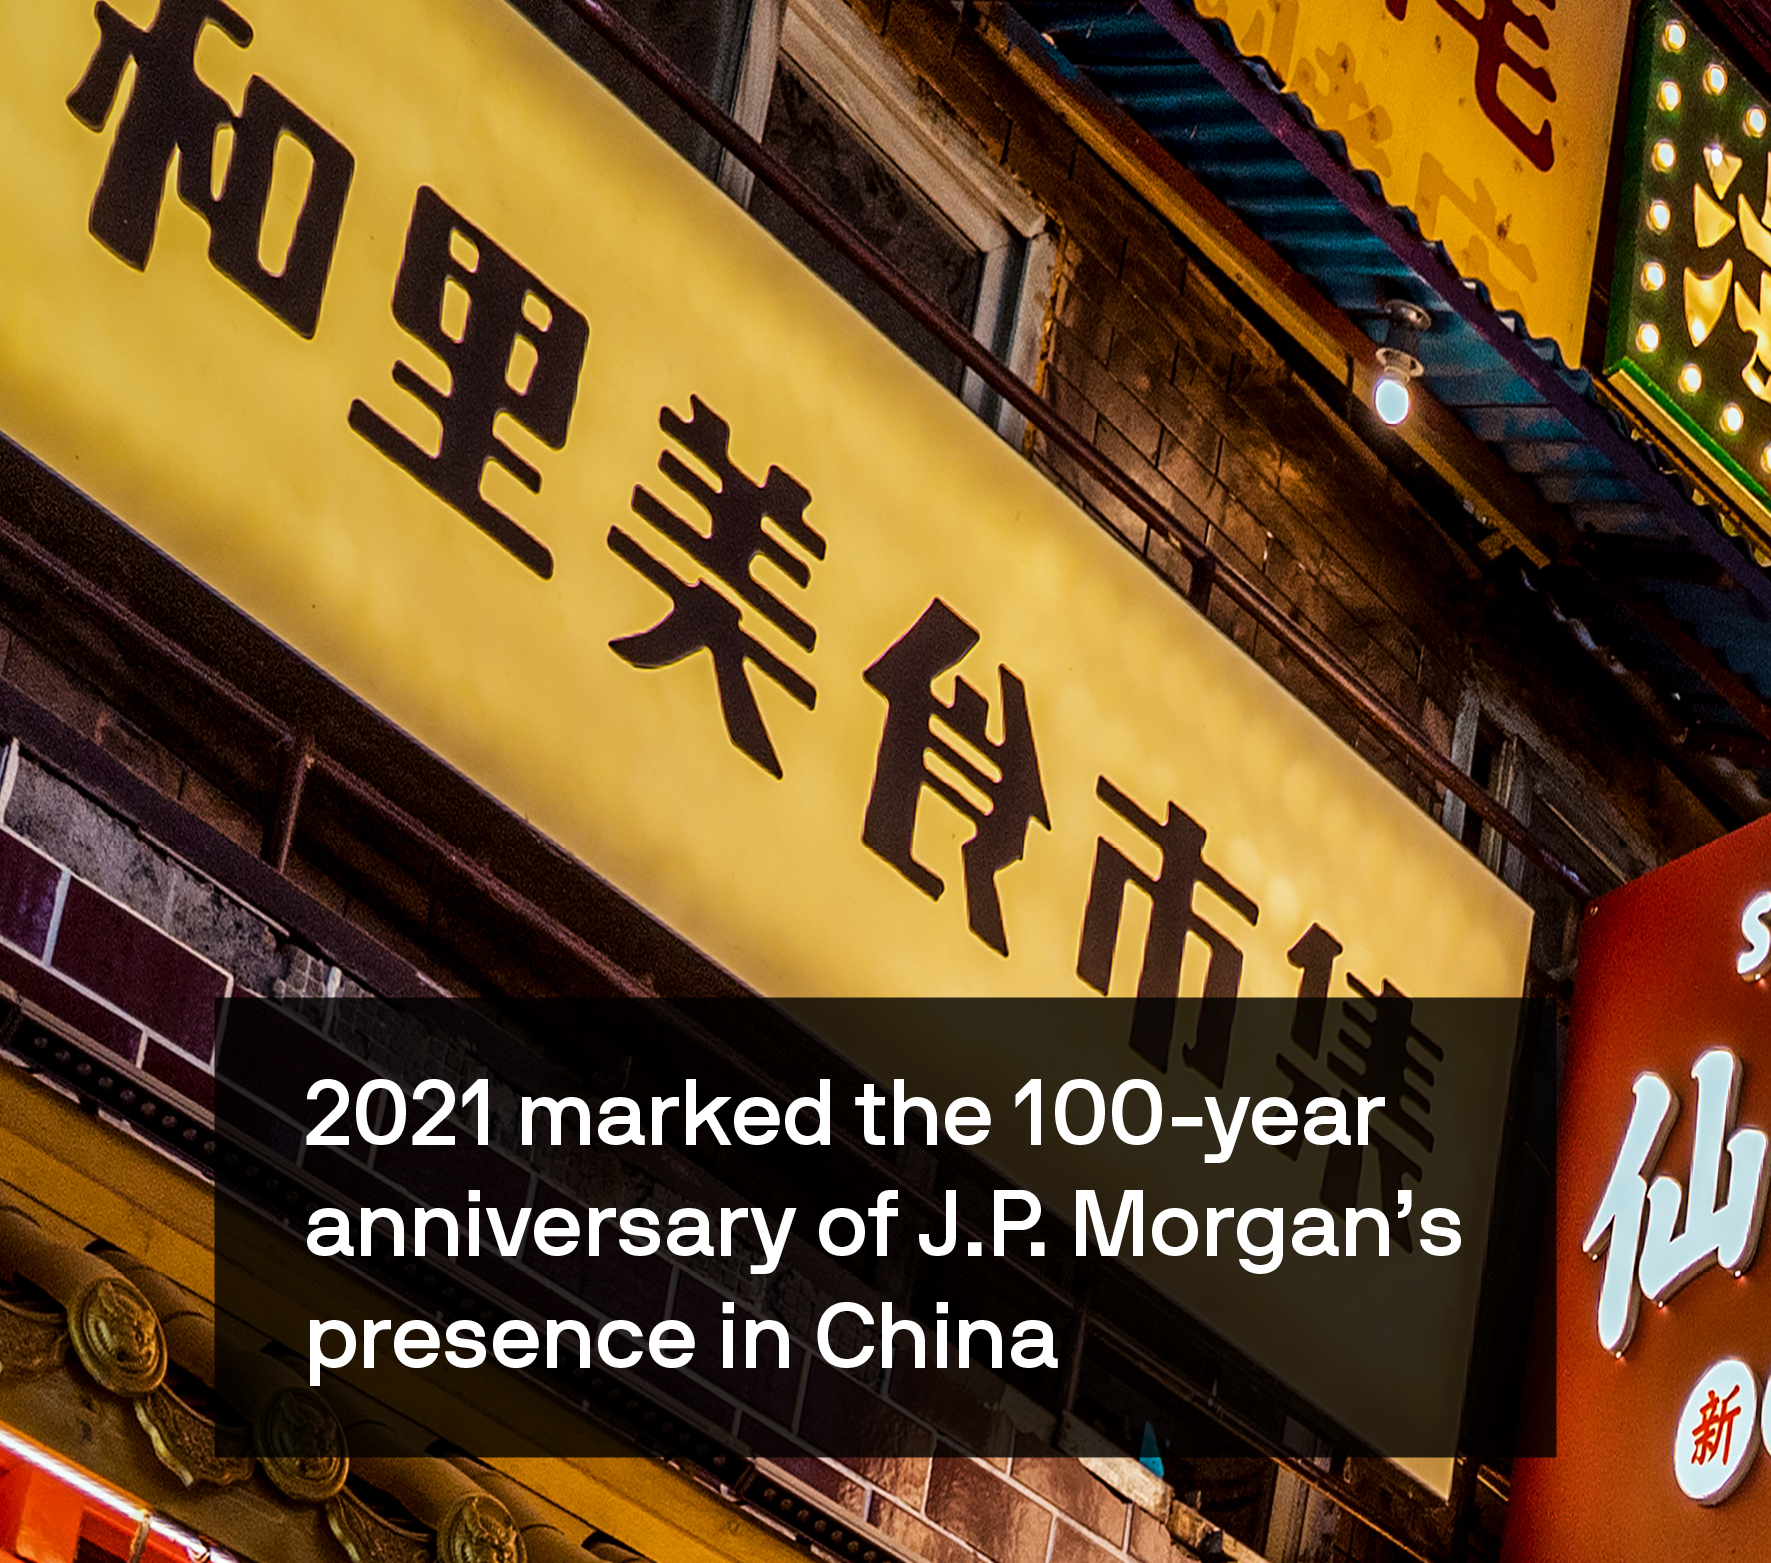 2021 marks the 100-year anniversary of J.P. Morgan's presence in China